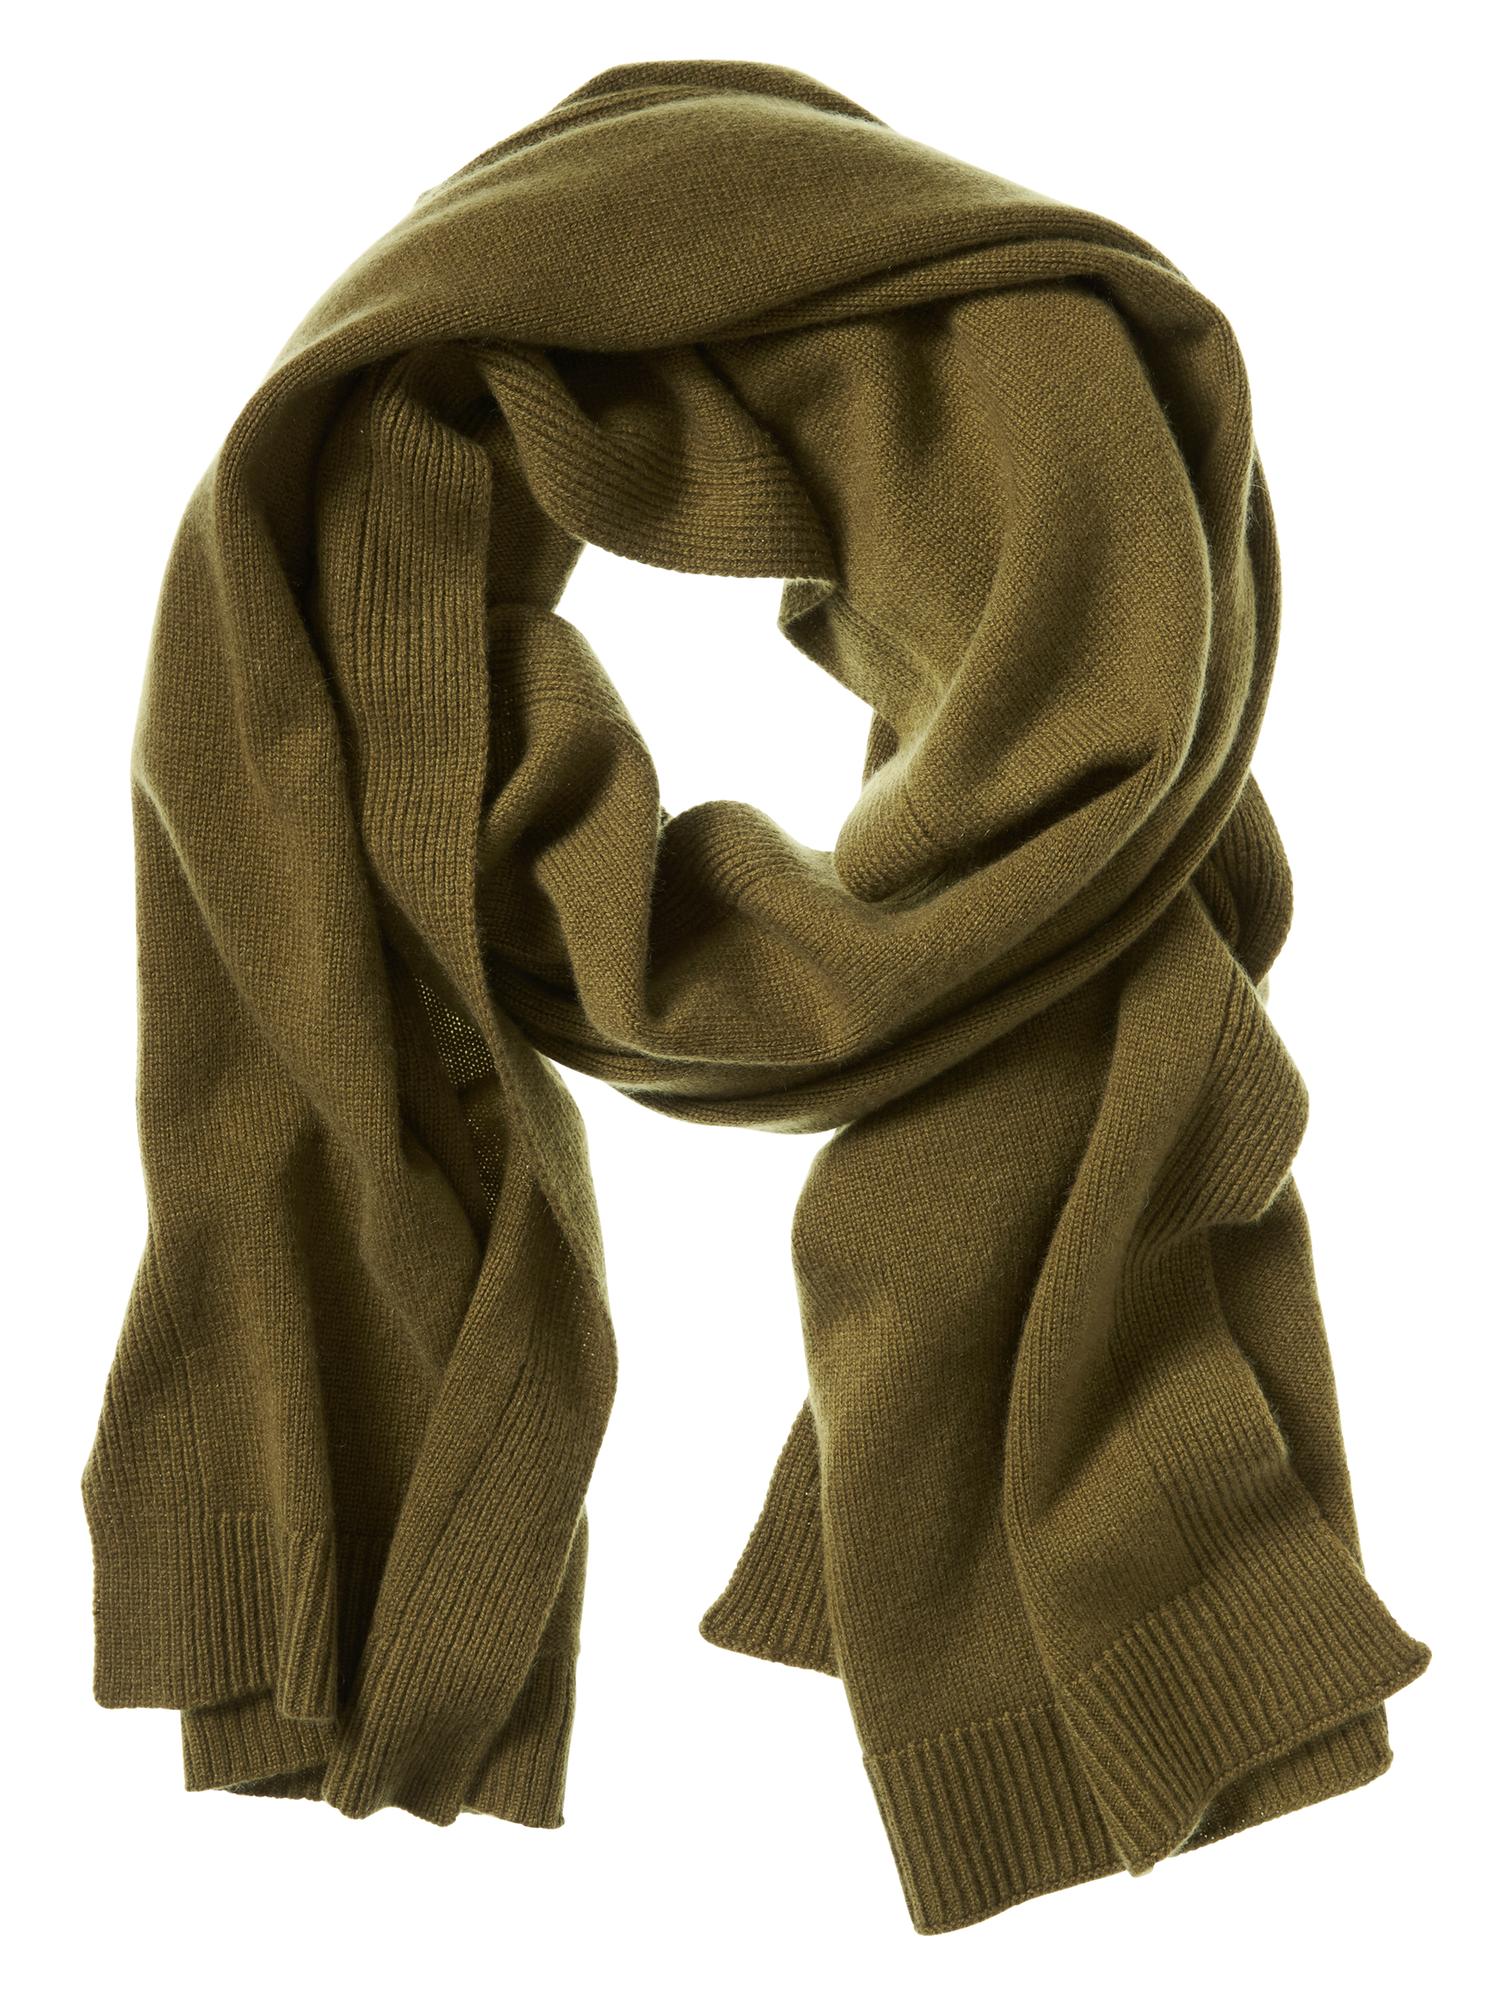 Todd & Duncan Plaited Cashmere Scarf